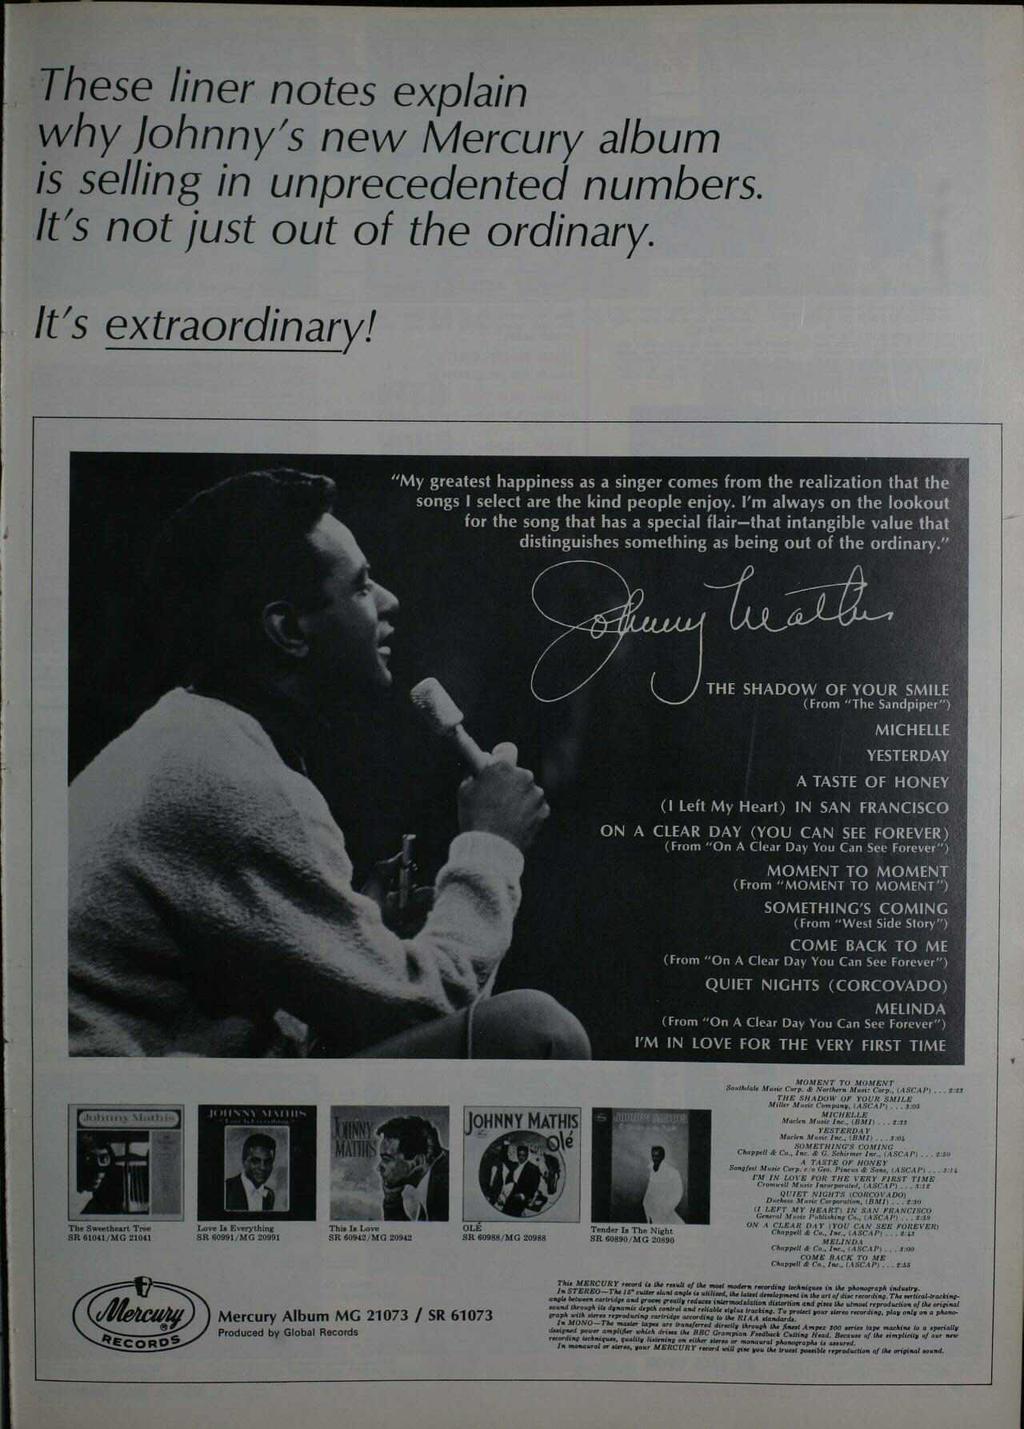 V4.1 These liner notes explain why Johnny's new Mercury album is selling in unprecedented numbers. It's not just out of the ordinary. It's extraordinary!